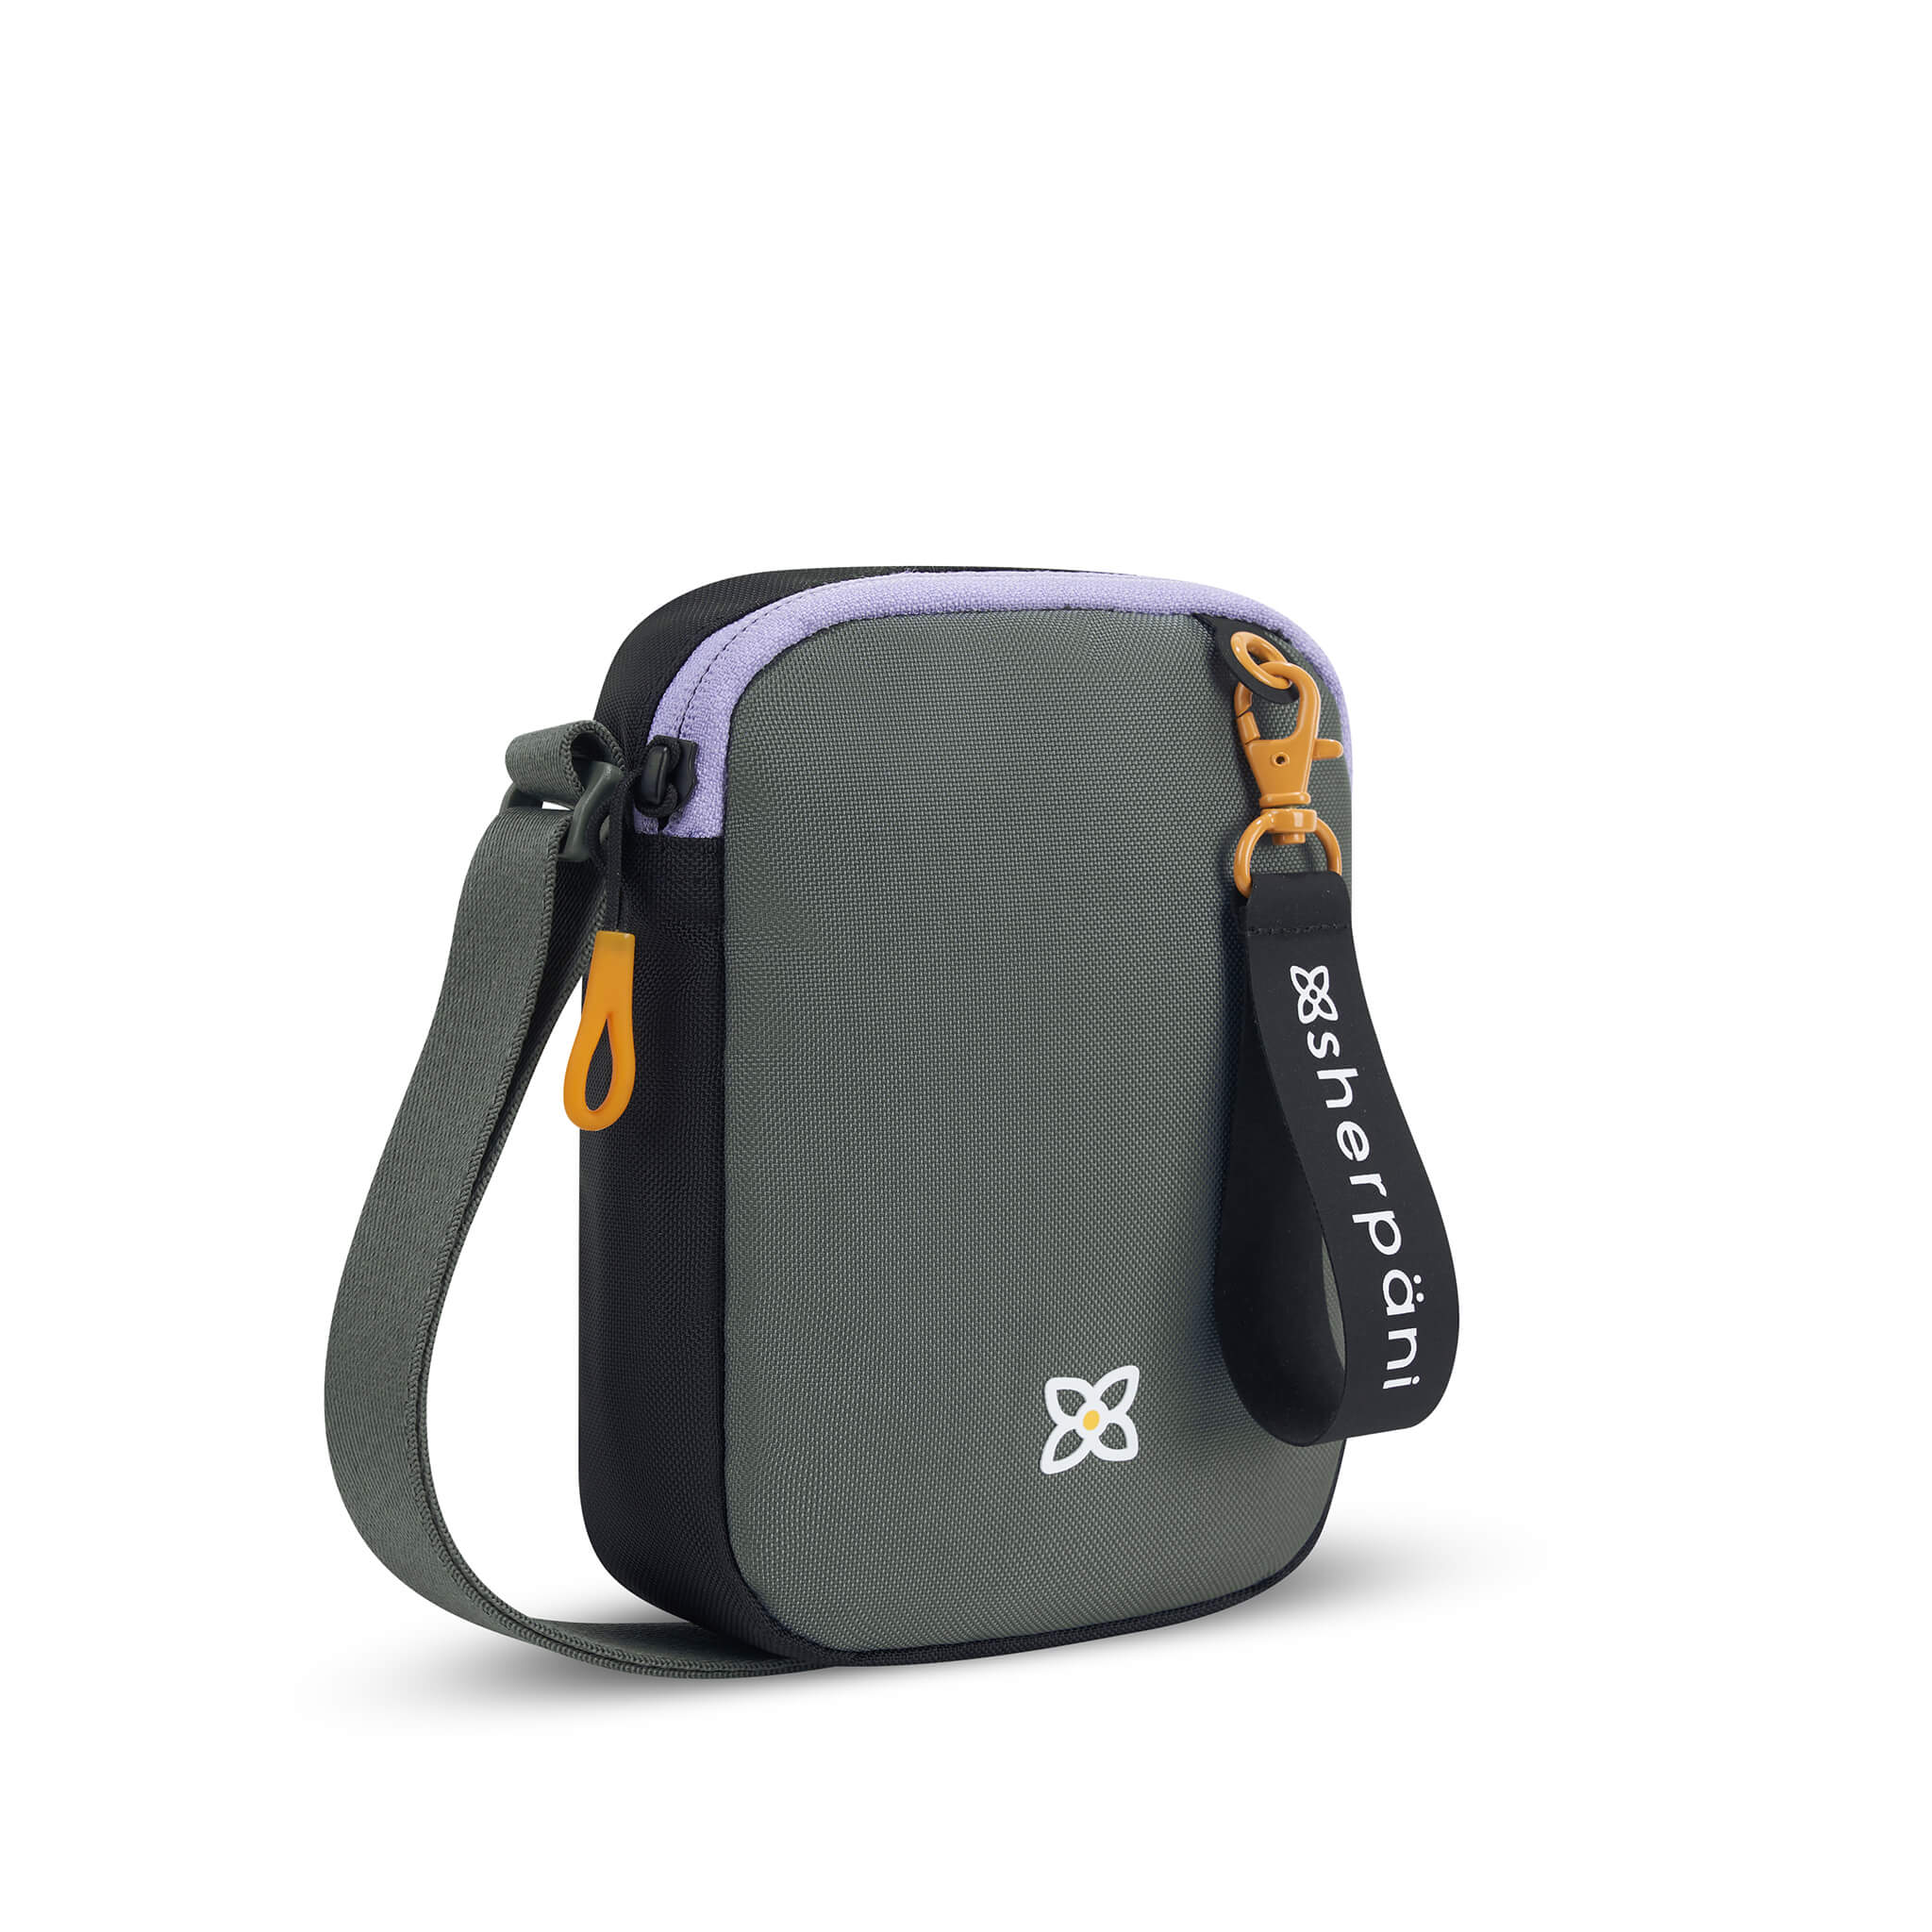 Angled front view of Sherpani mini crossbody purse, the Rogue in Juniper. Rogue features include an adjustable crossbody strap, detachable keychain, compact design, minimalist bag, RFID protection and back slip pocket. The Juniper color is two-toned in black and gray with yellow accents. #color_juniper